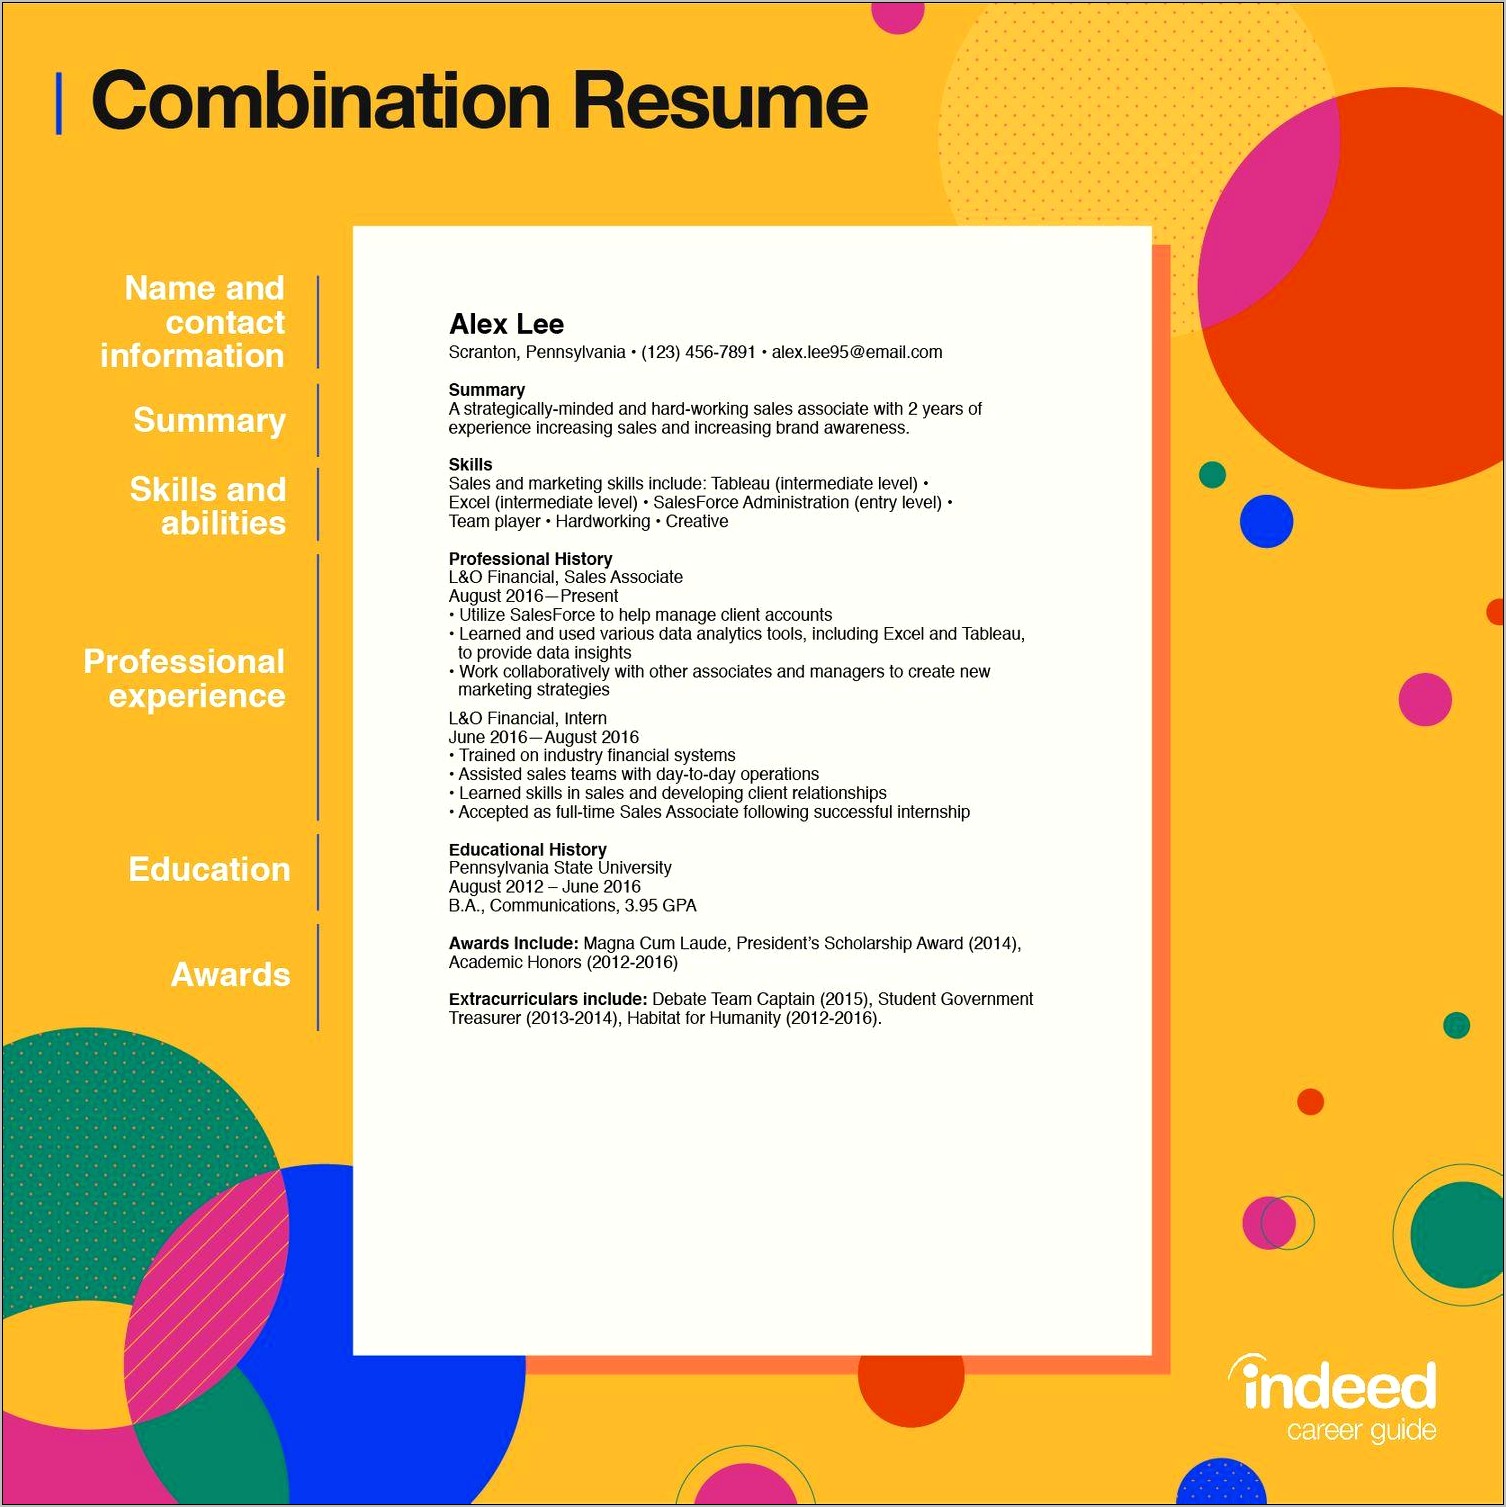 Download Samples Of Combined Resumes